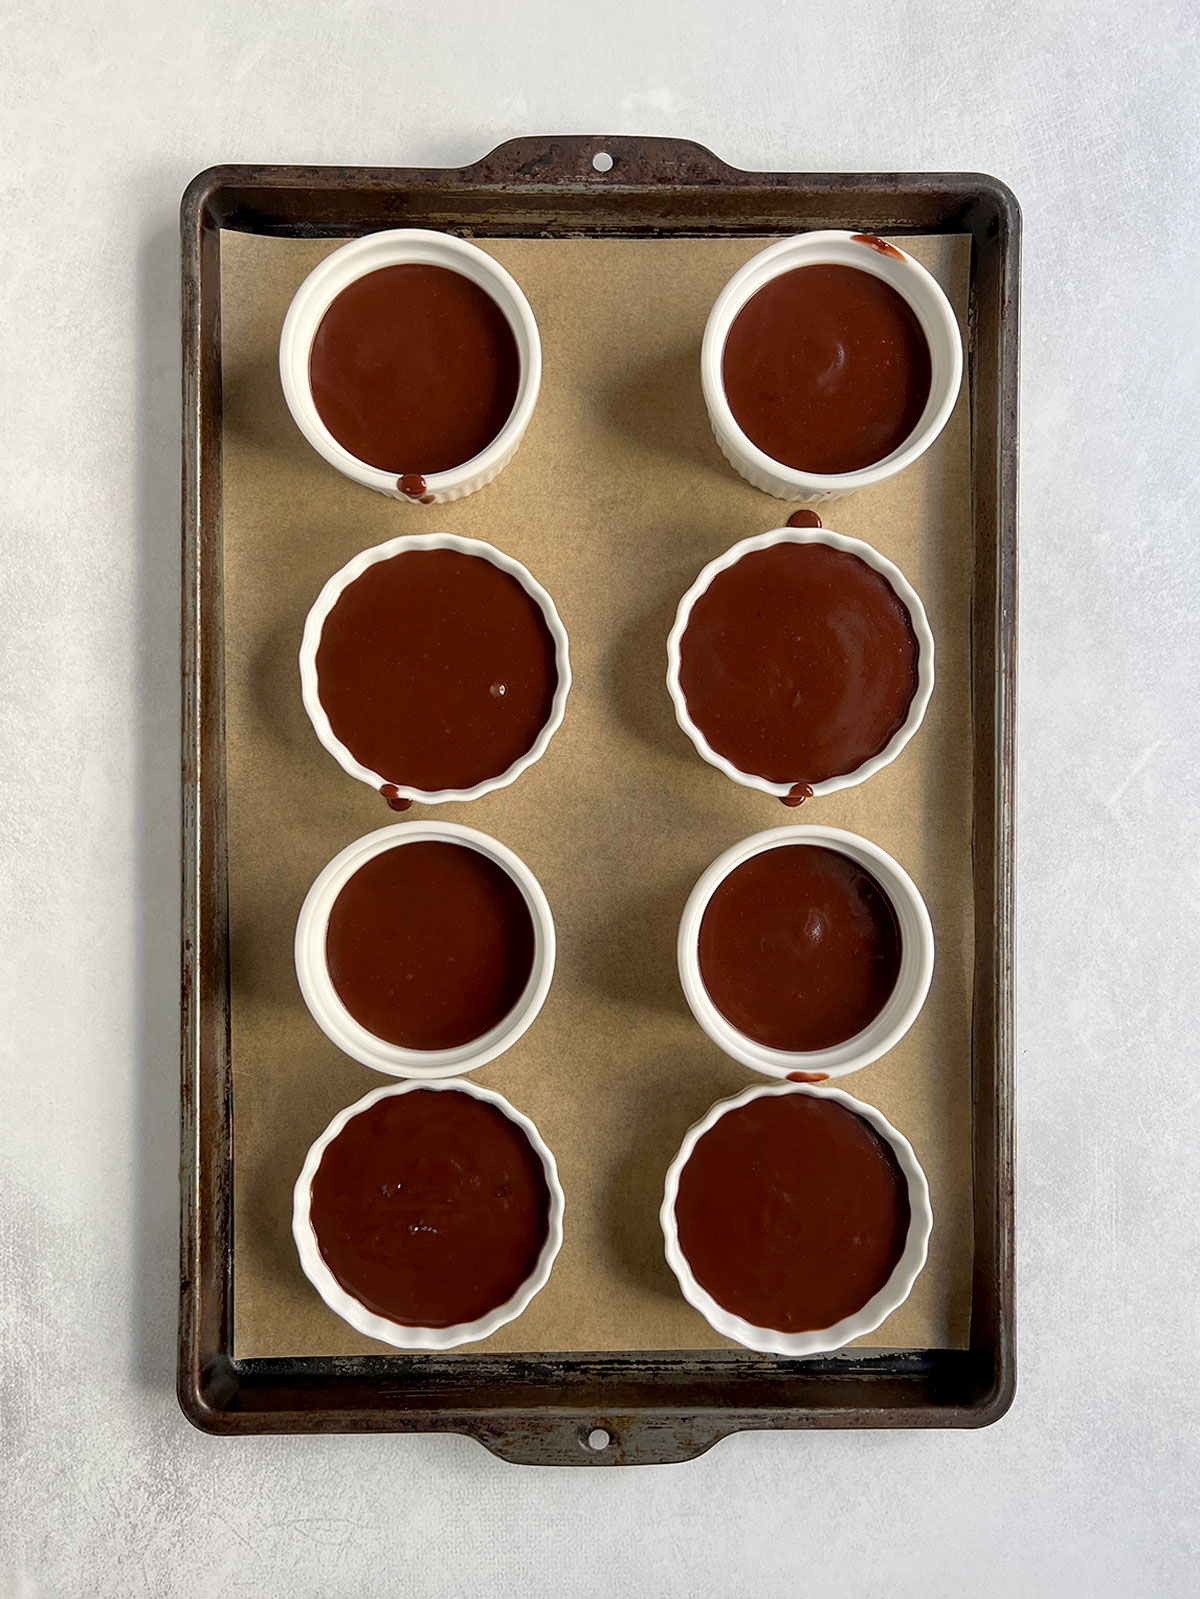 Eight serving bowls filled on a parchment-lined baking tray ready to go in the refrigerator.